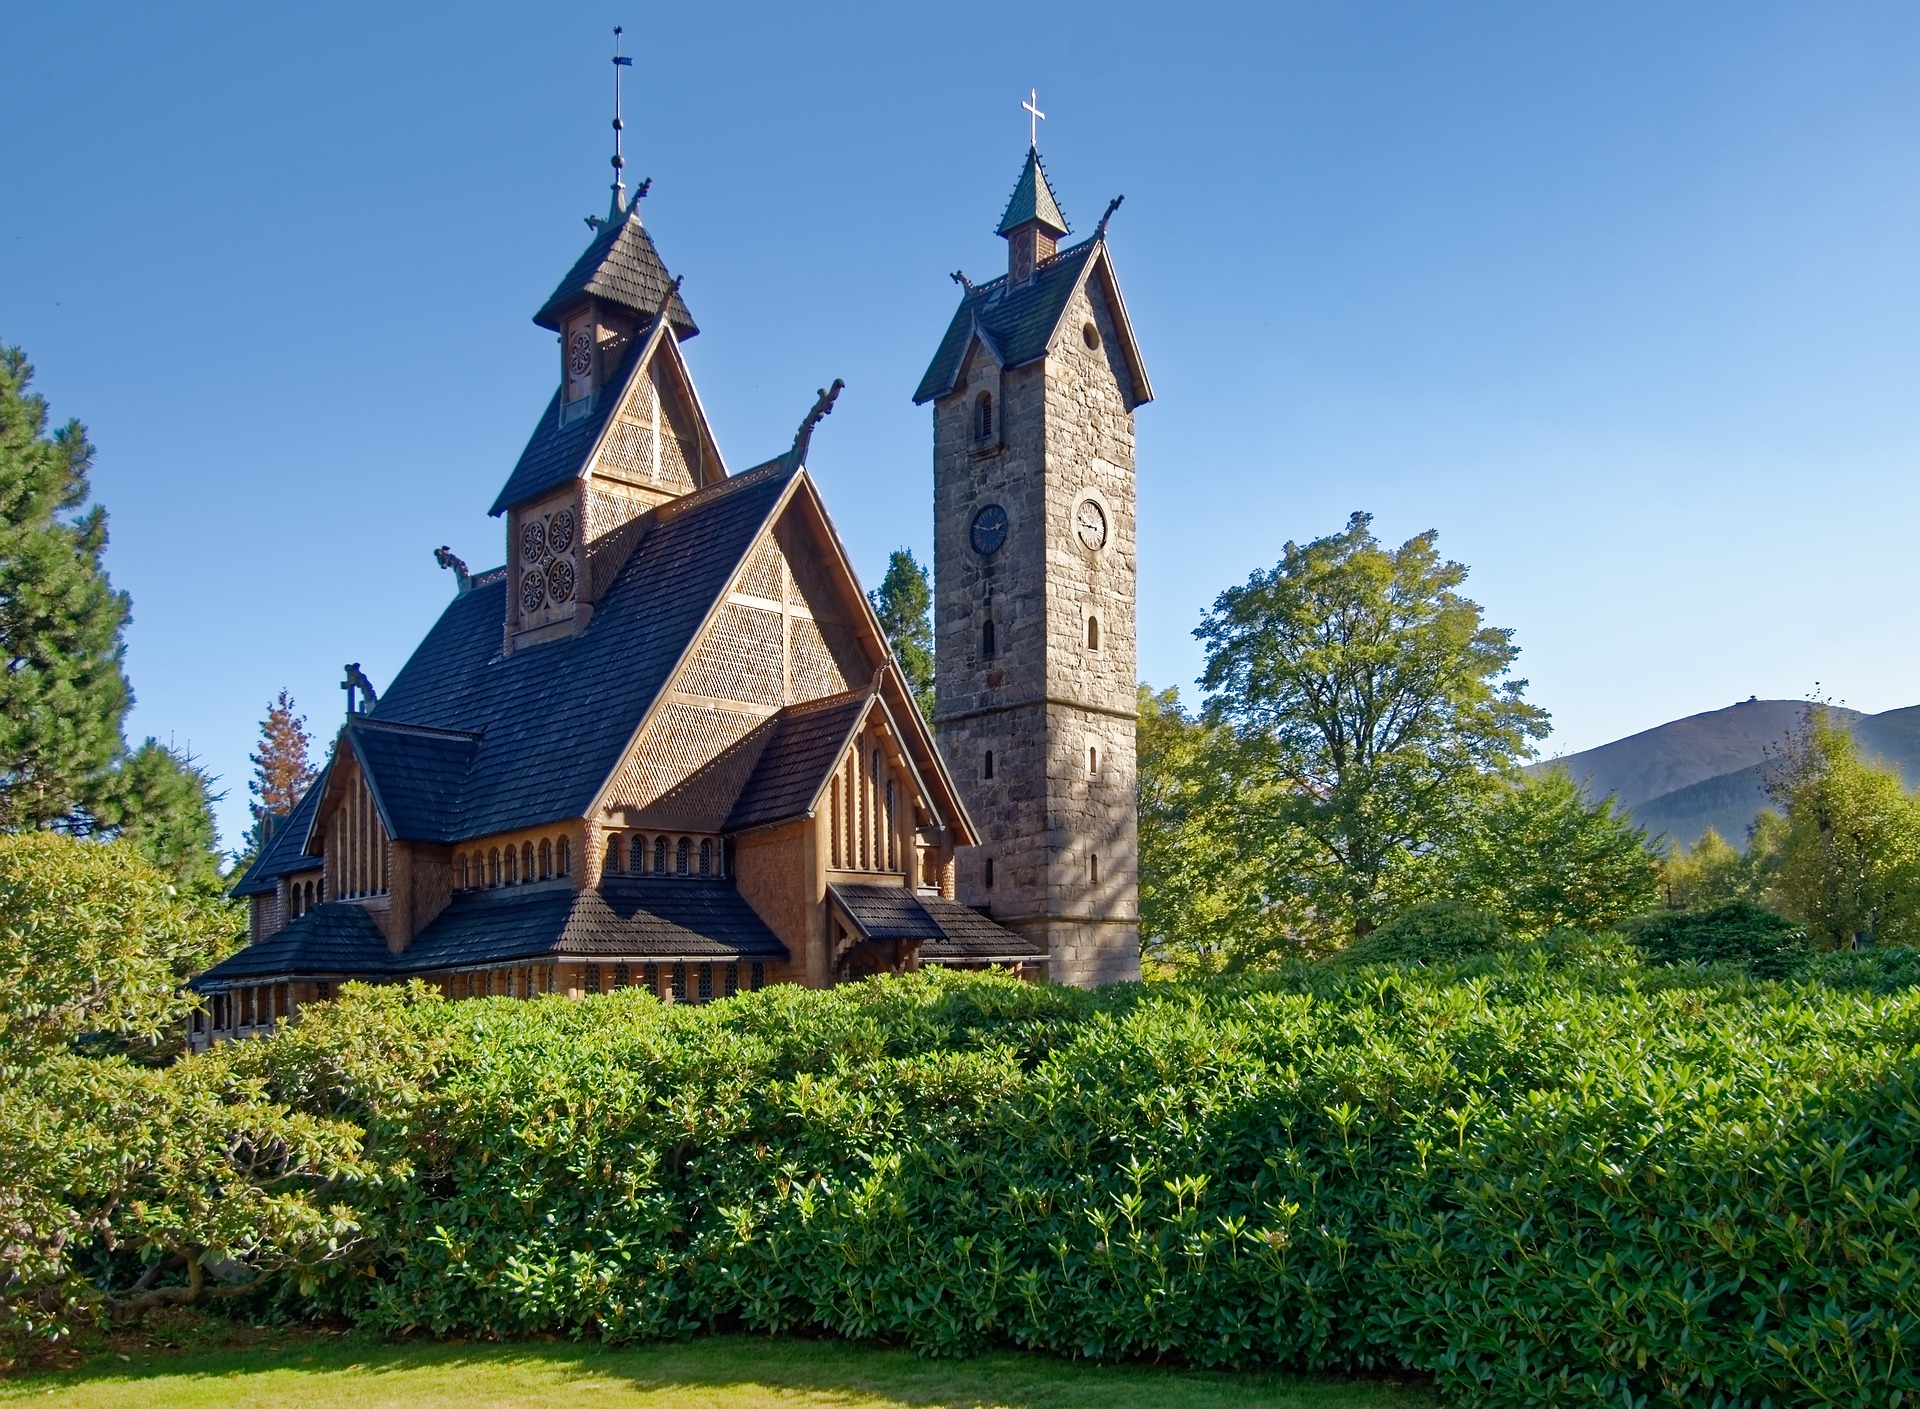 The Vang stave church in summer